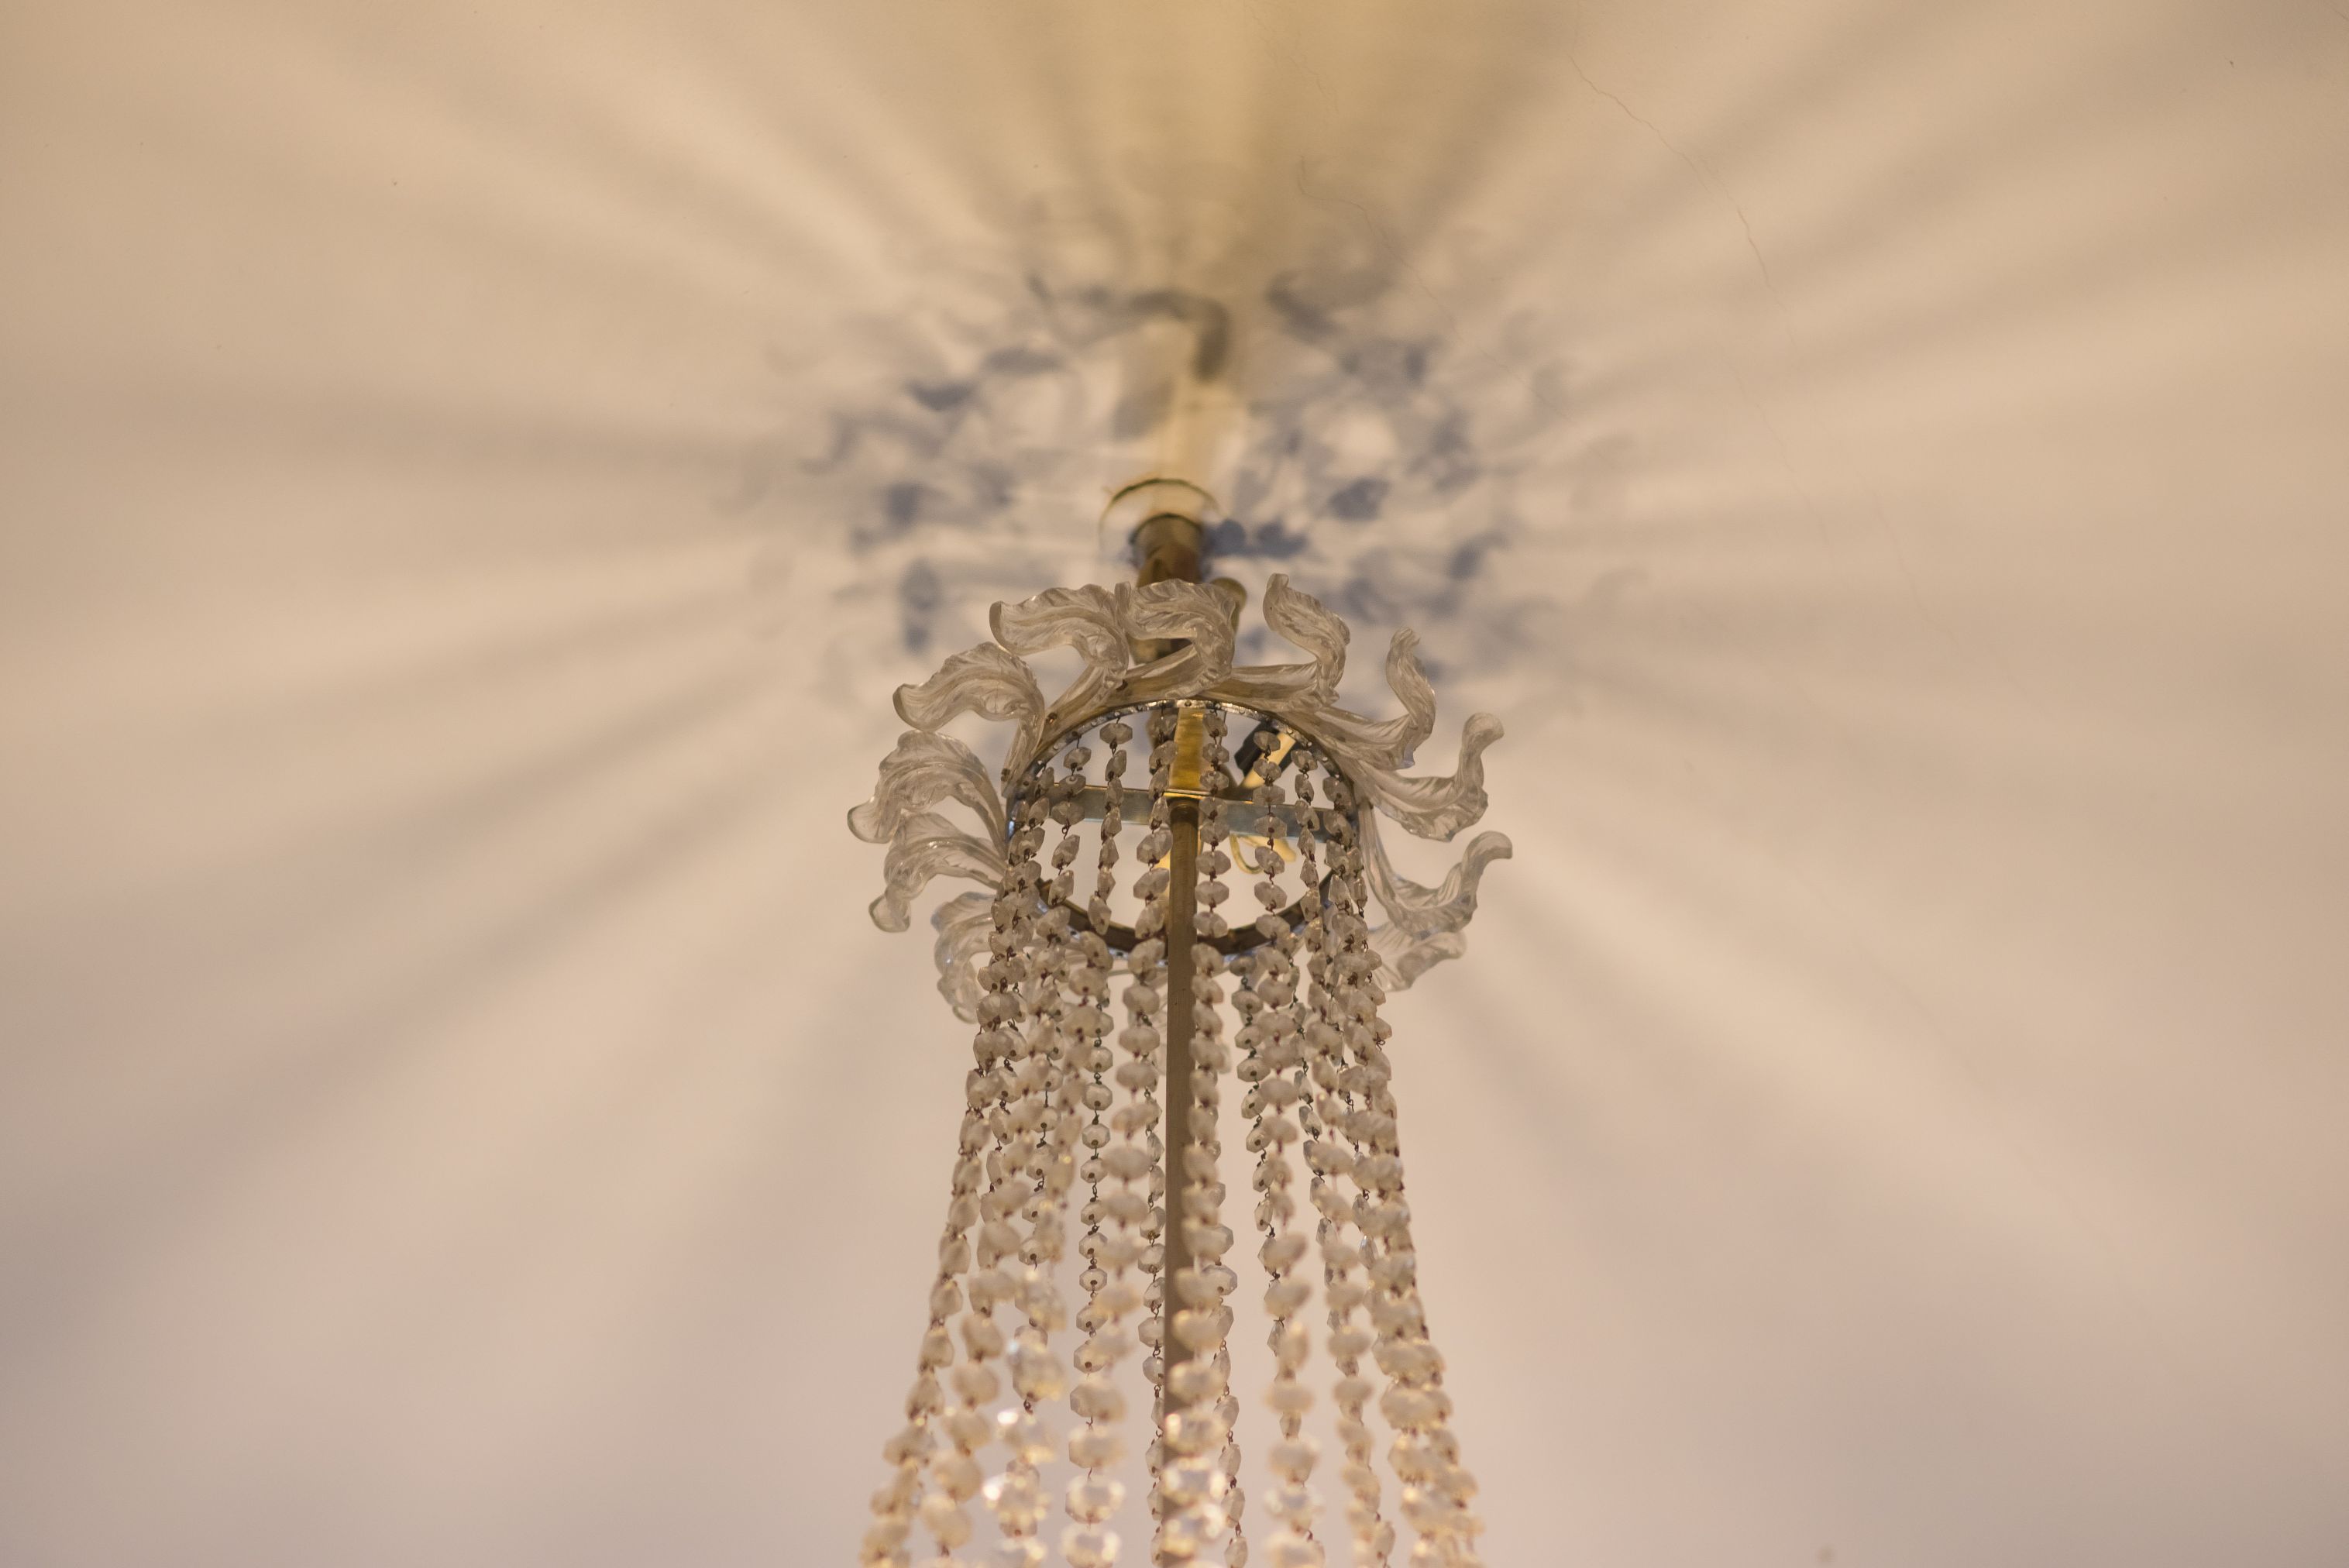 Fragment of chandelier, 1910–1929, Archdiocese of Vilnius. Photo by Povilas Jarmala, 2017